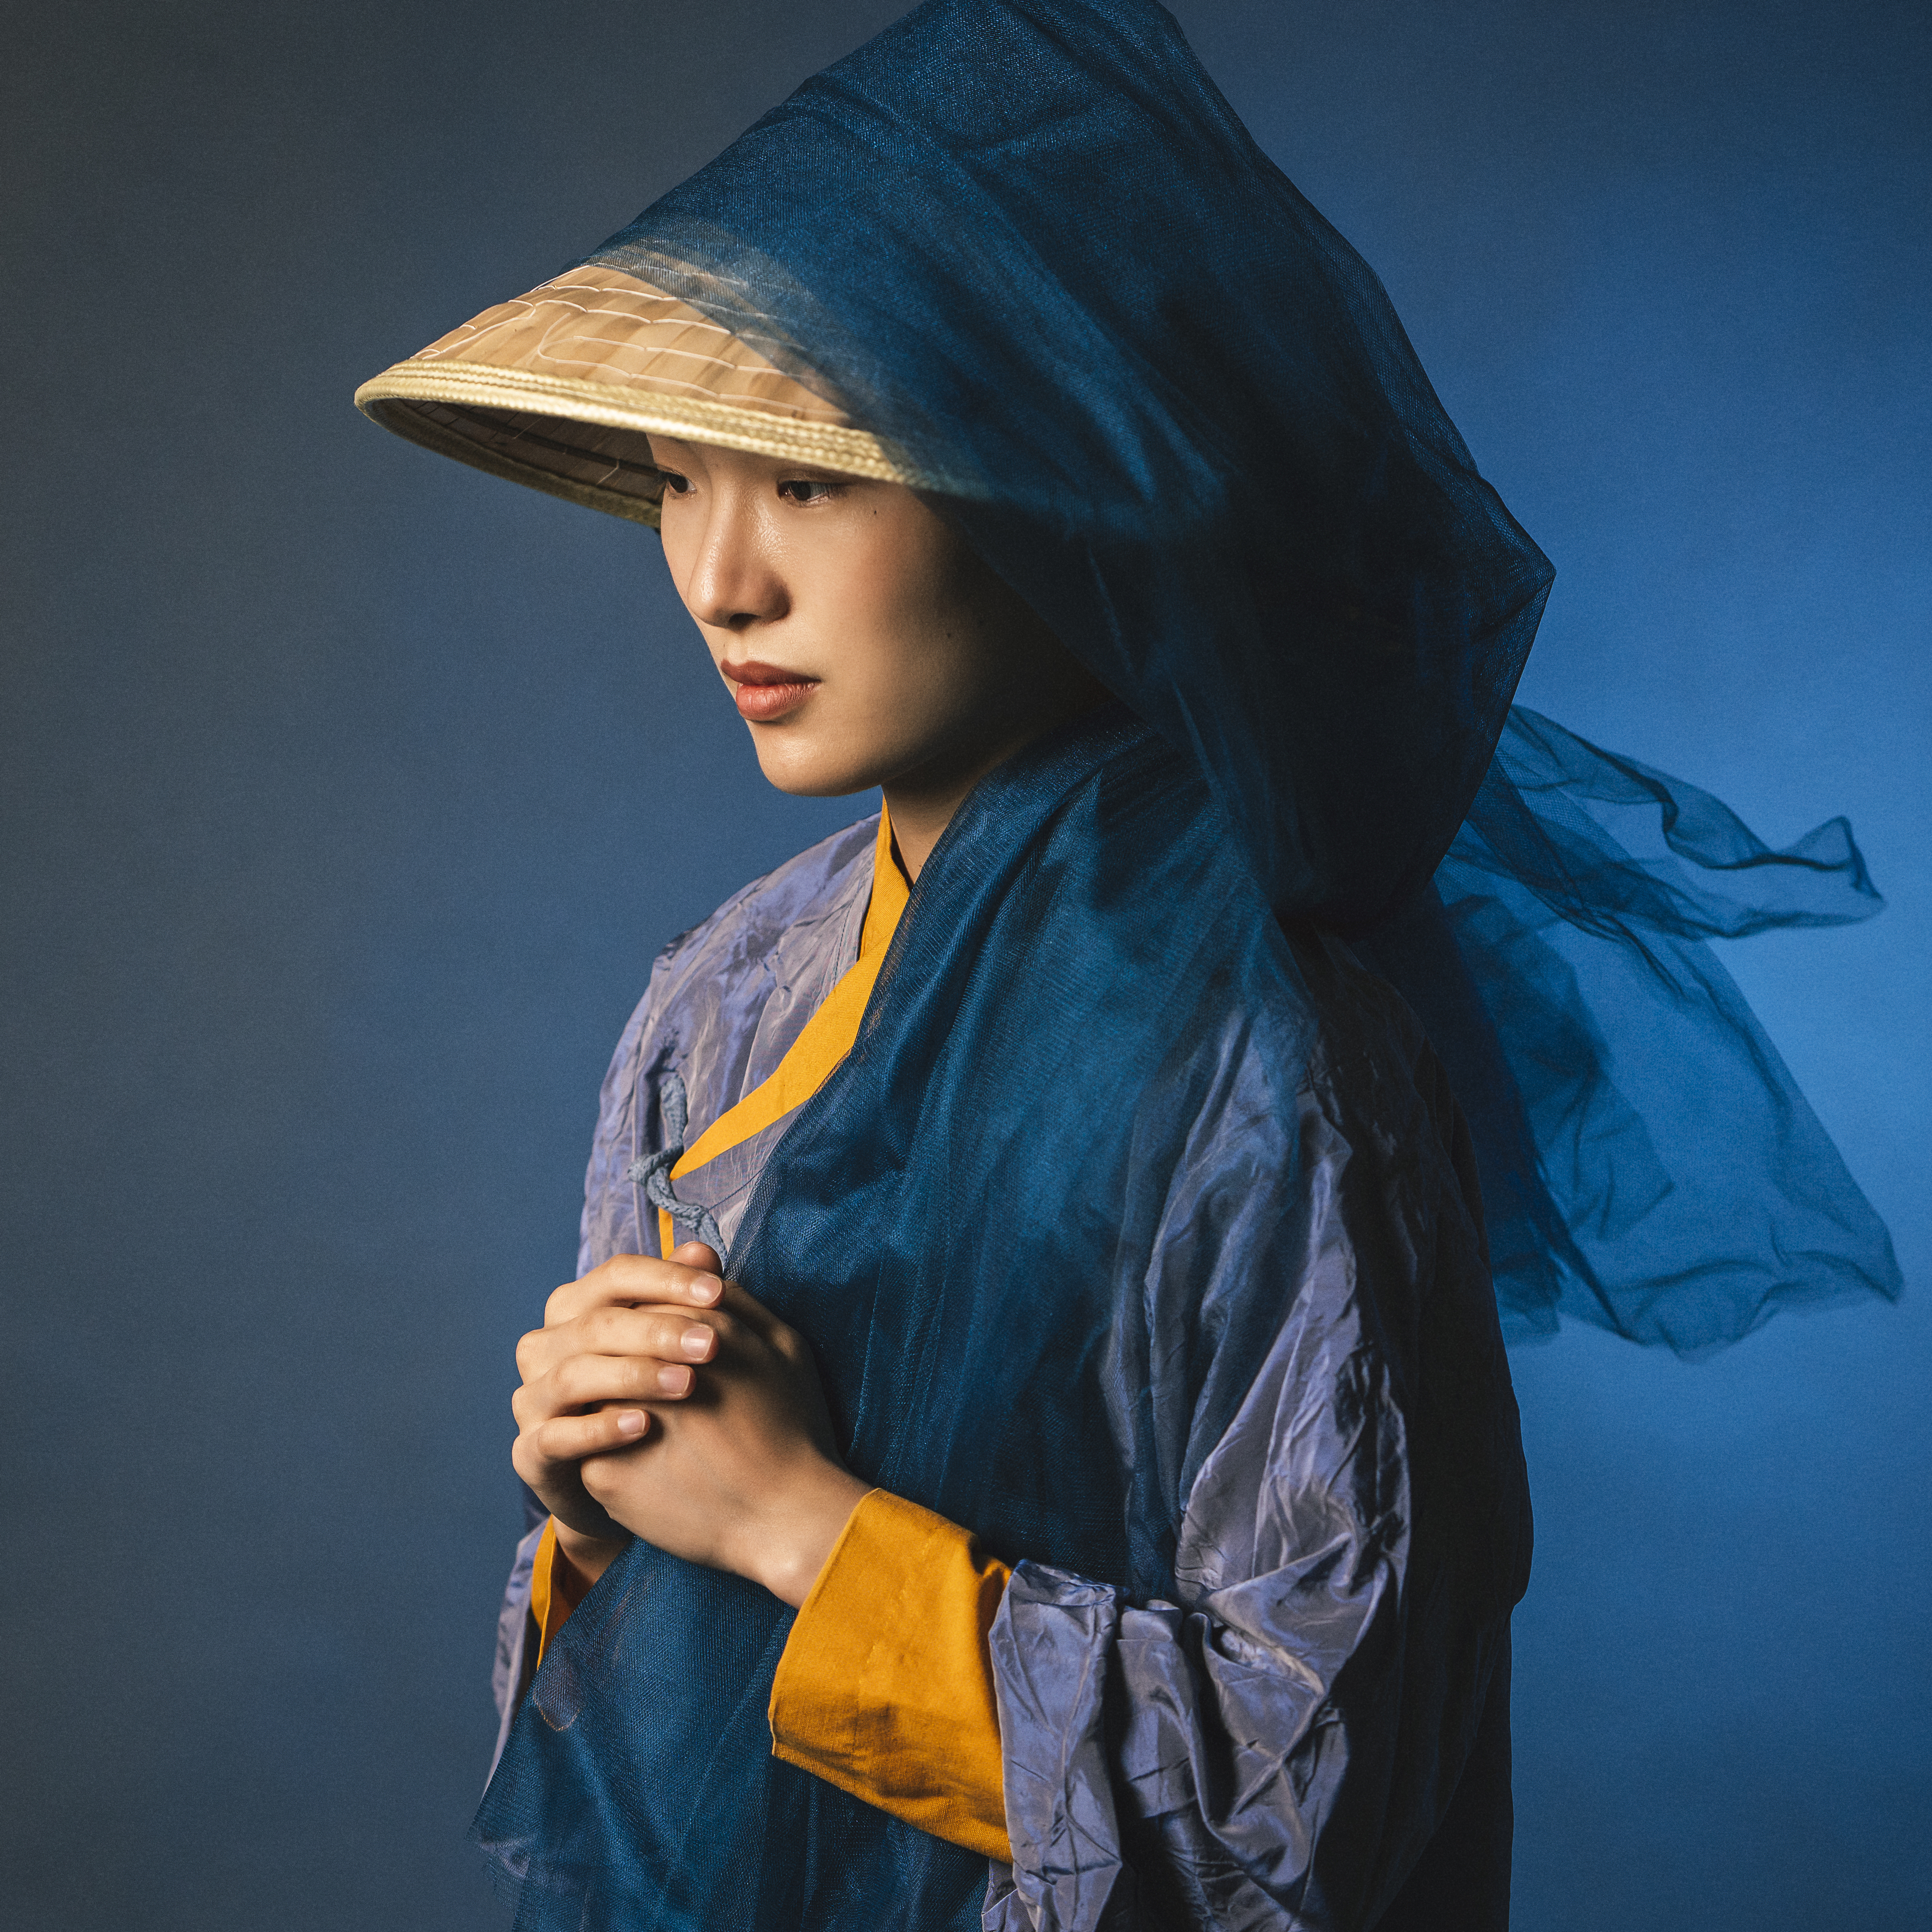 attractive, beauty, chinese girl, dreaminess, dress, elegance, fashion, female, femininity, hat, human face, individuality, lifestyles, light, looking, one person, portrait, pose, shadow, side view, standing, studio shot, traditional clothing, young woman, Alex Tsarfin